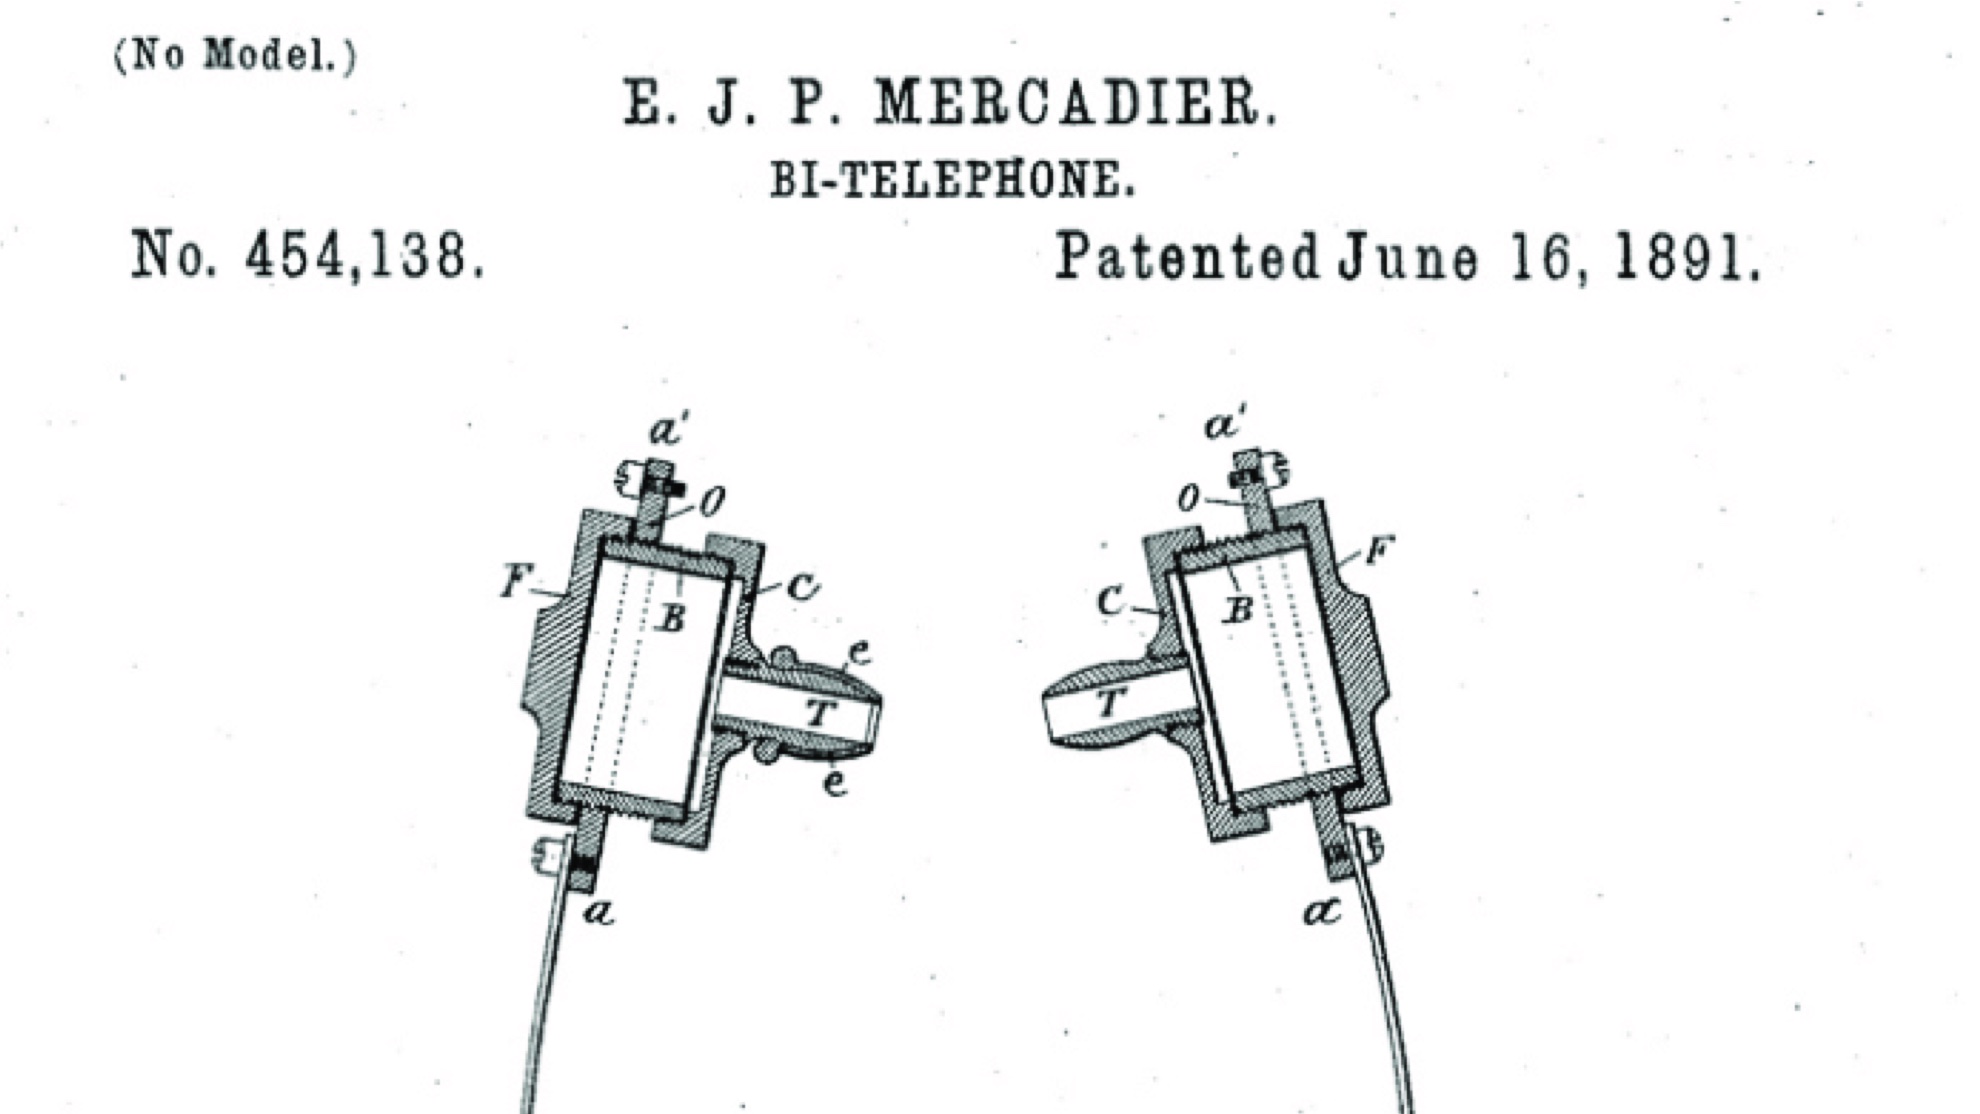 A patent image for a biphone